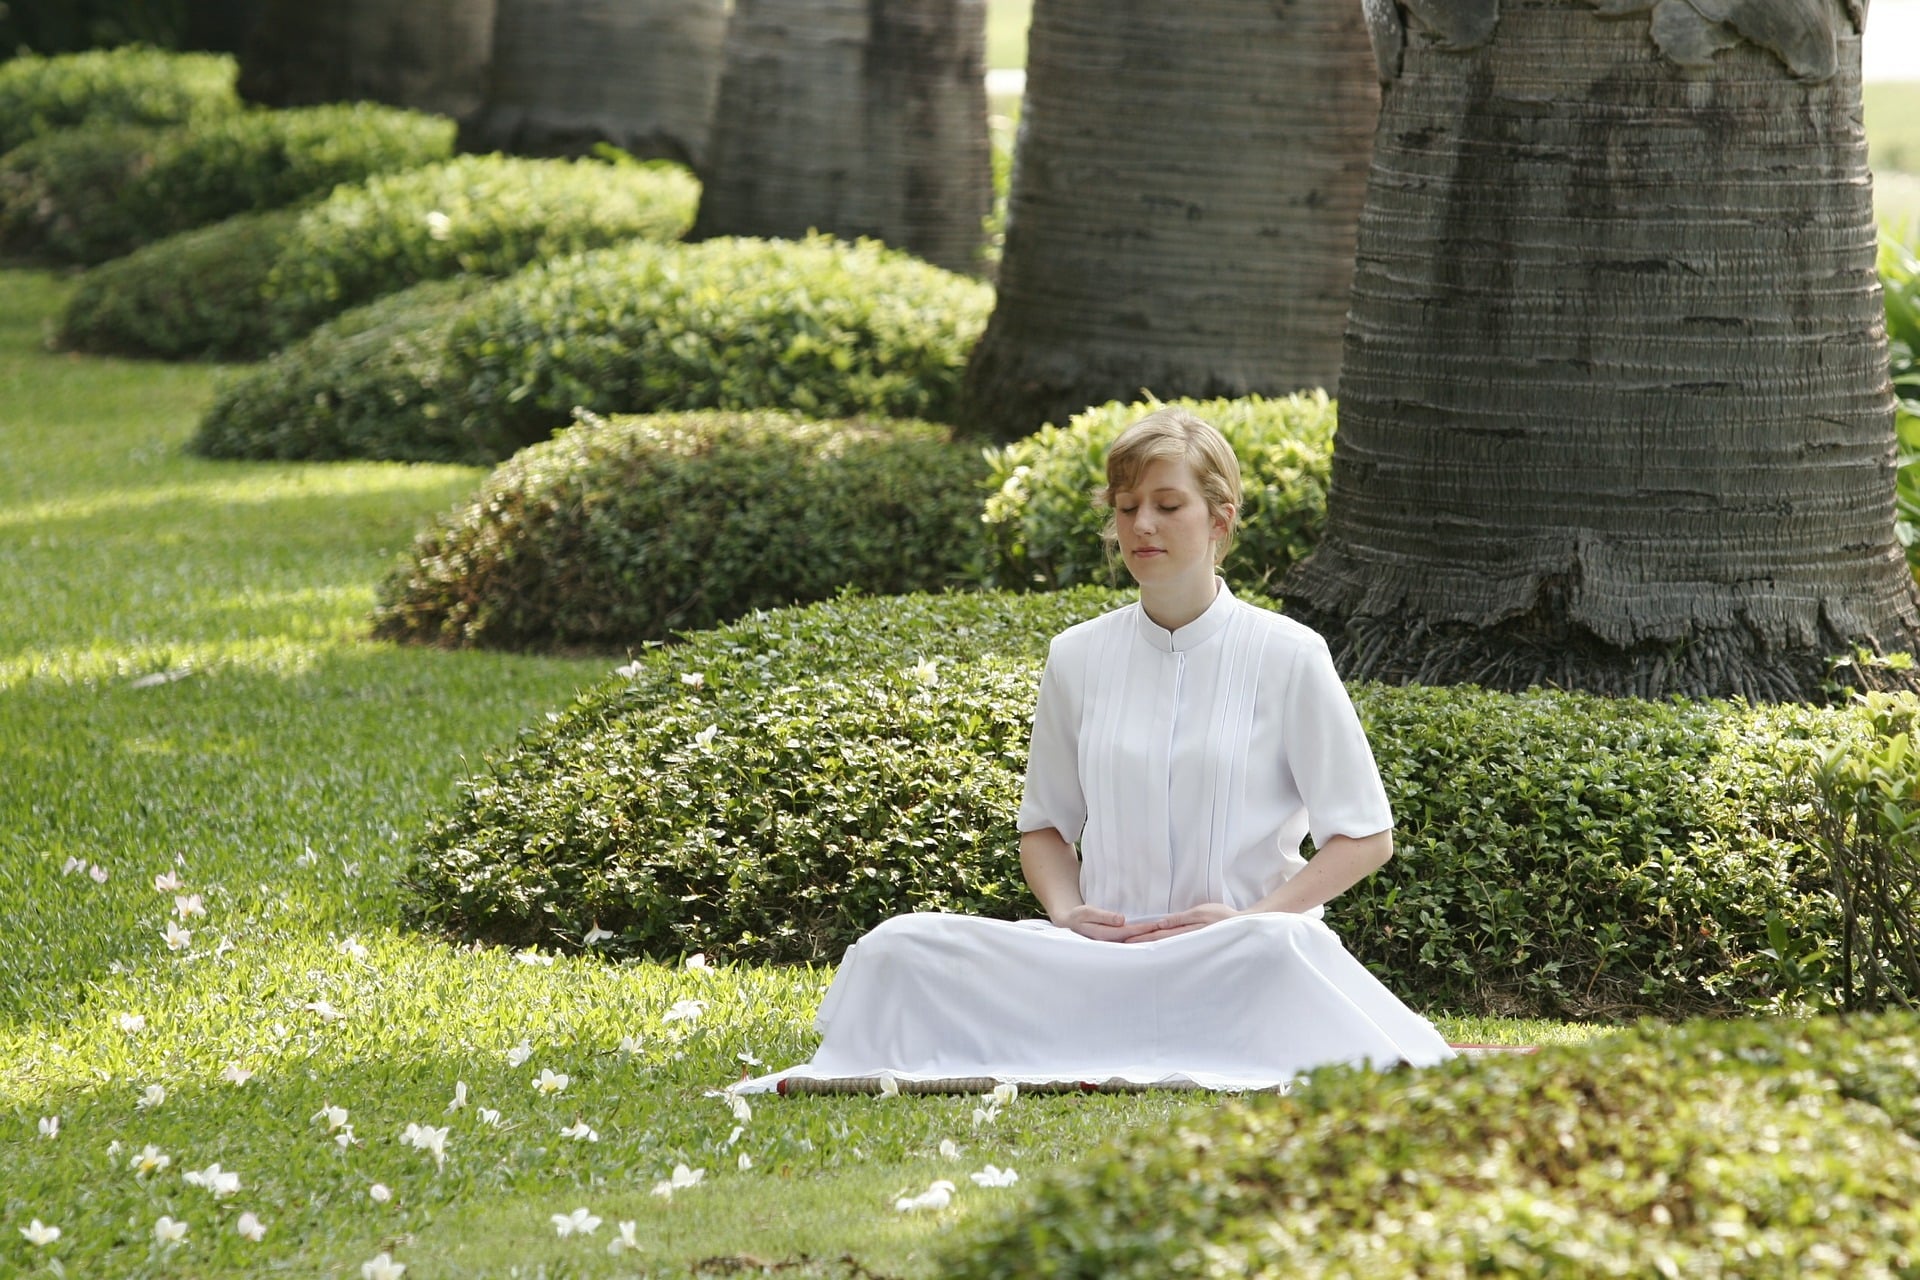 A woman in white dress is meditating in a garden